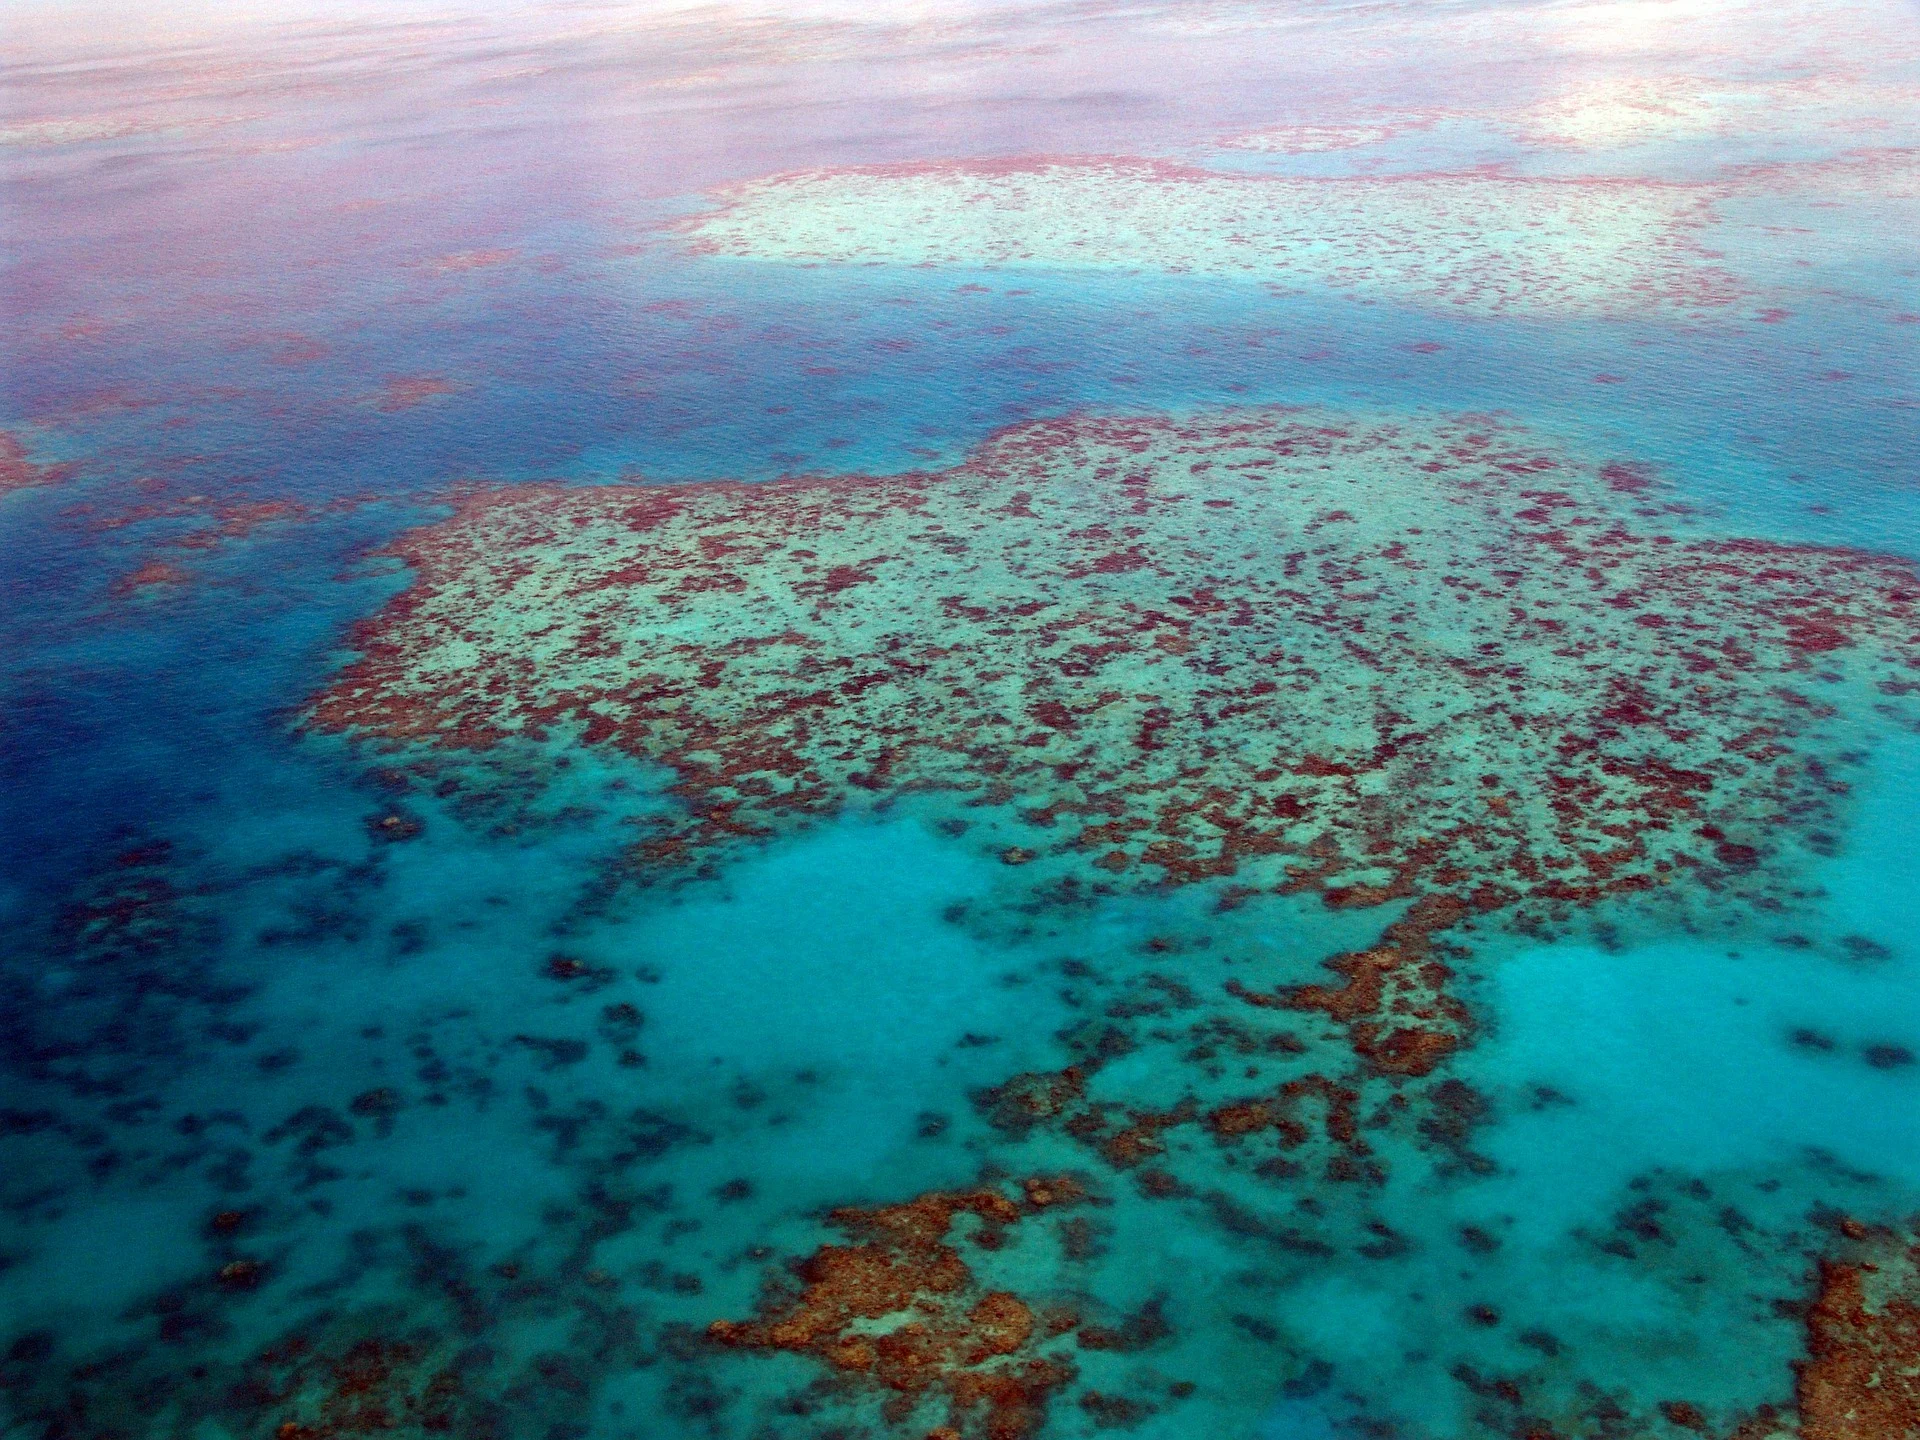 the great barrier reef in Australia. Credit: Pixabay